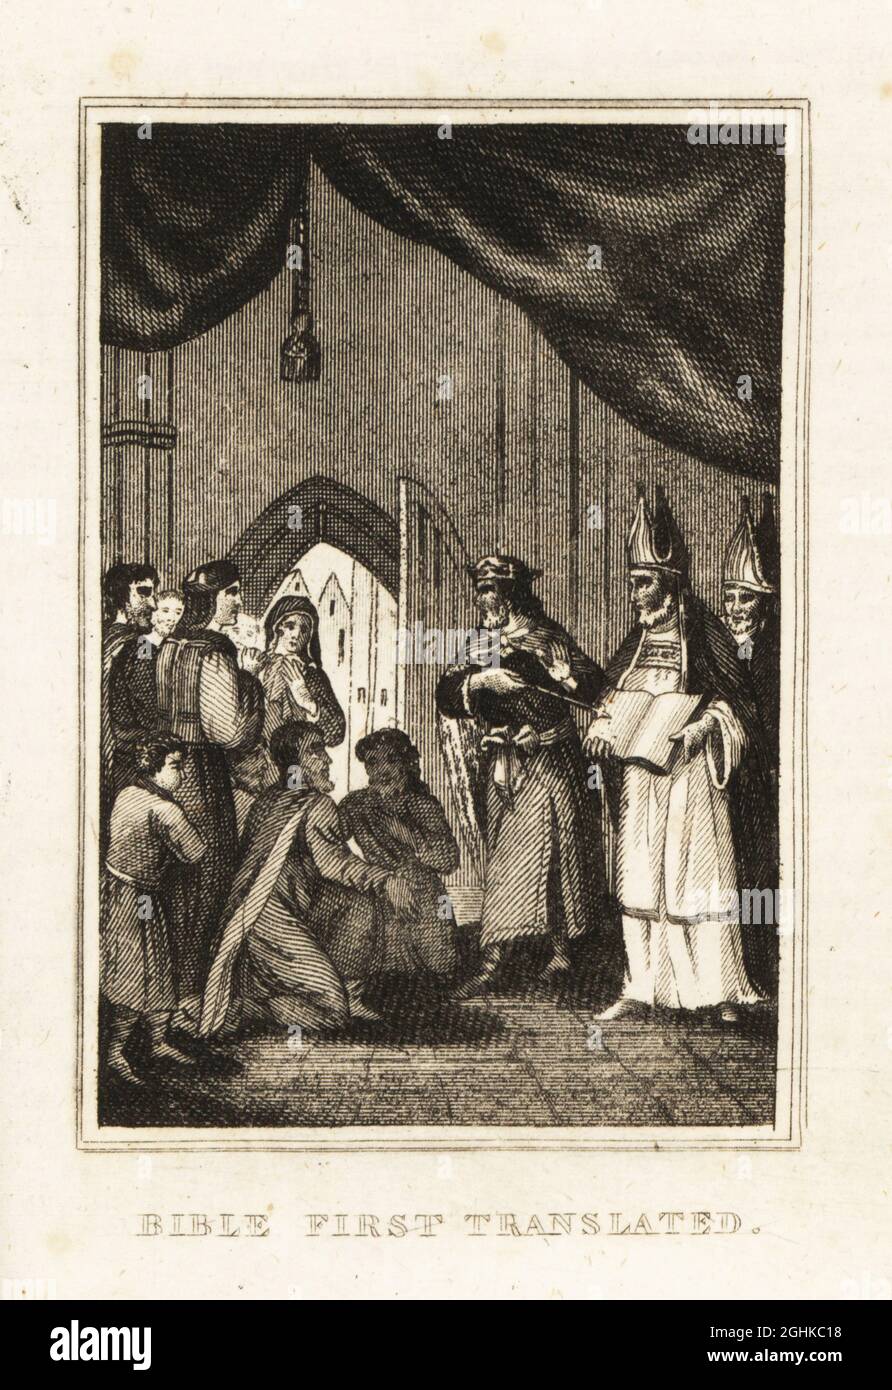 King Henry VIII and bishops presenting William Tyndale's first English translation of the Bible, 1525. Bible first translated. Copperplate engraving from M. A. Jones’ History of England from Julius Caesar to George IV, G. Virtue, 26 Ivy Lane, London, 1836. Stock Photo